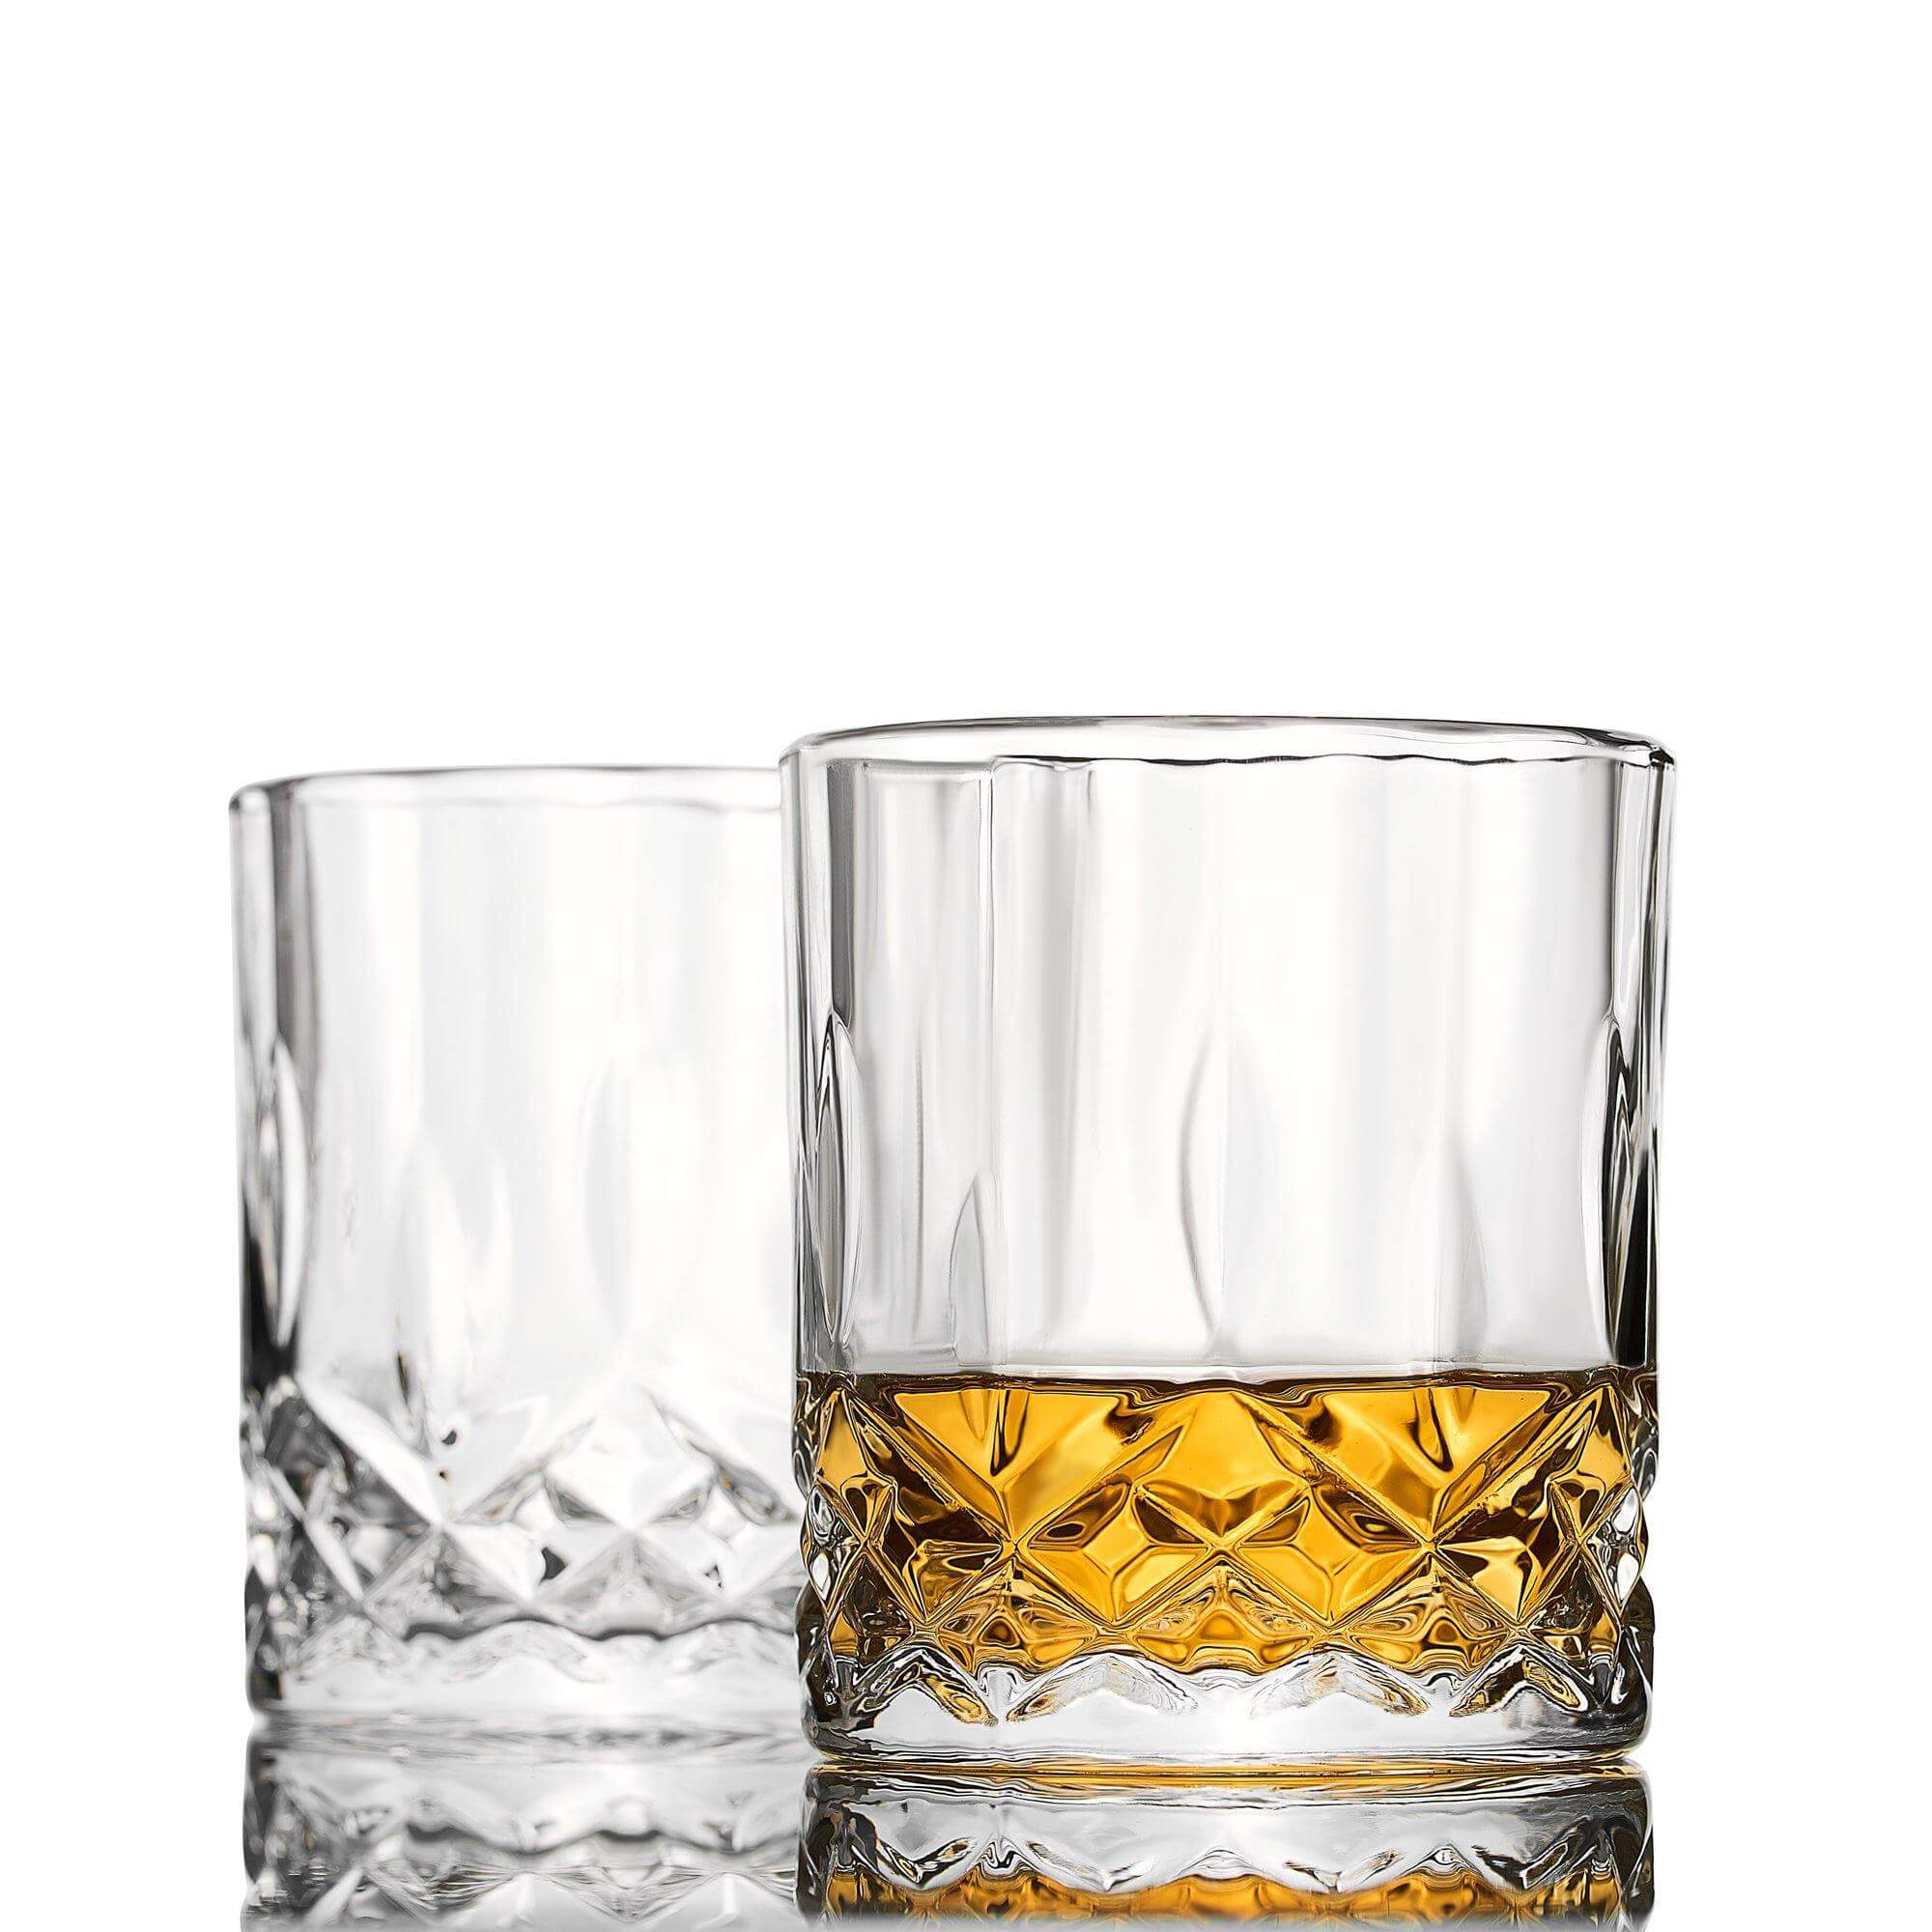 6 Best Whisky Glasses All True Connoisseurs Need